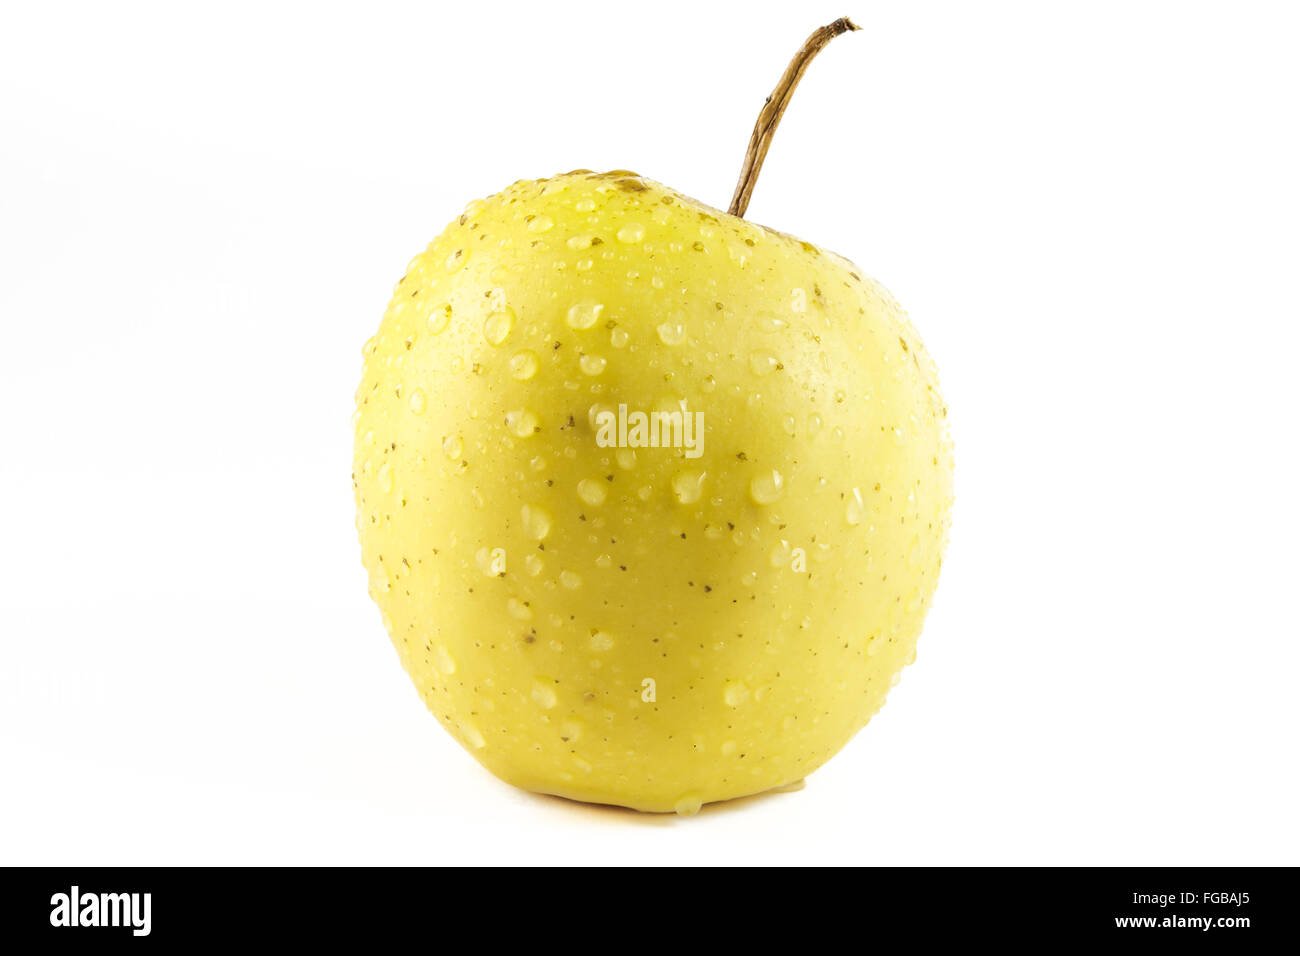 Golden delicious apple isolated on white background Stock Photo